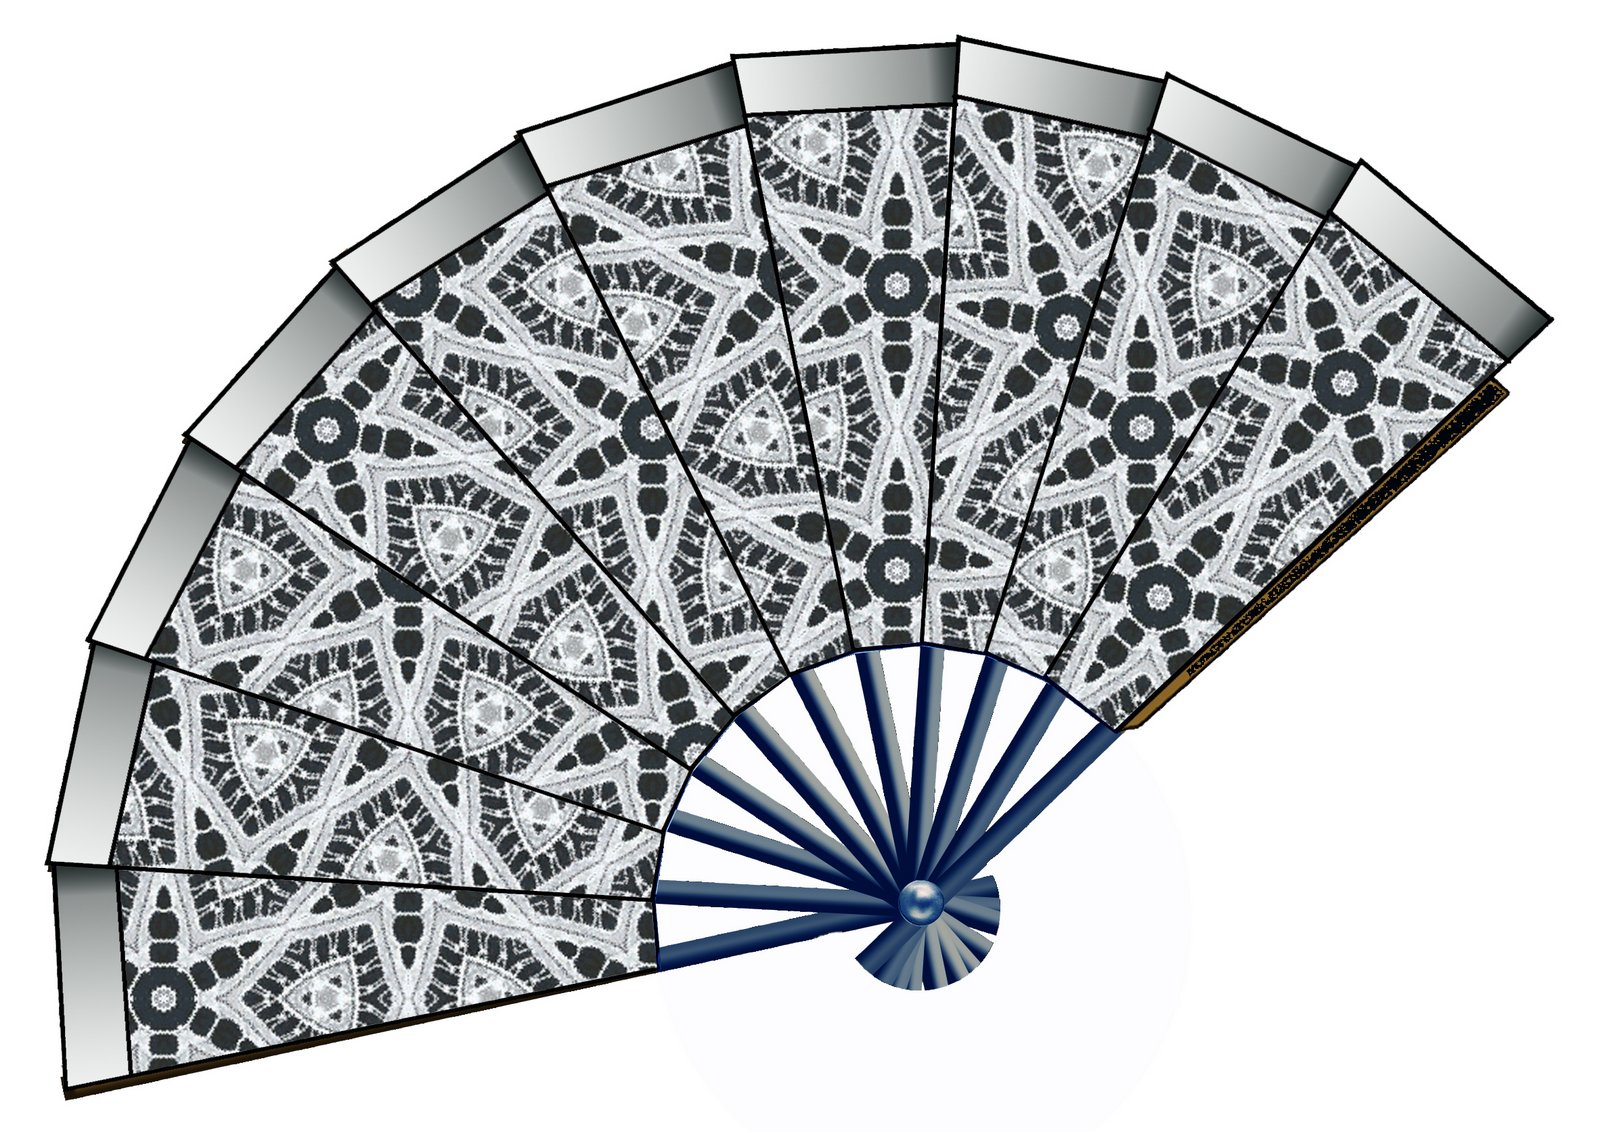 ArtbyJean - Paper Crafts: Decoupage fans with lace patterns - Lace ...